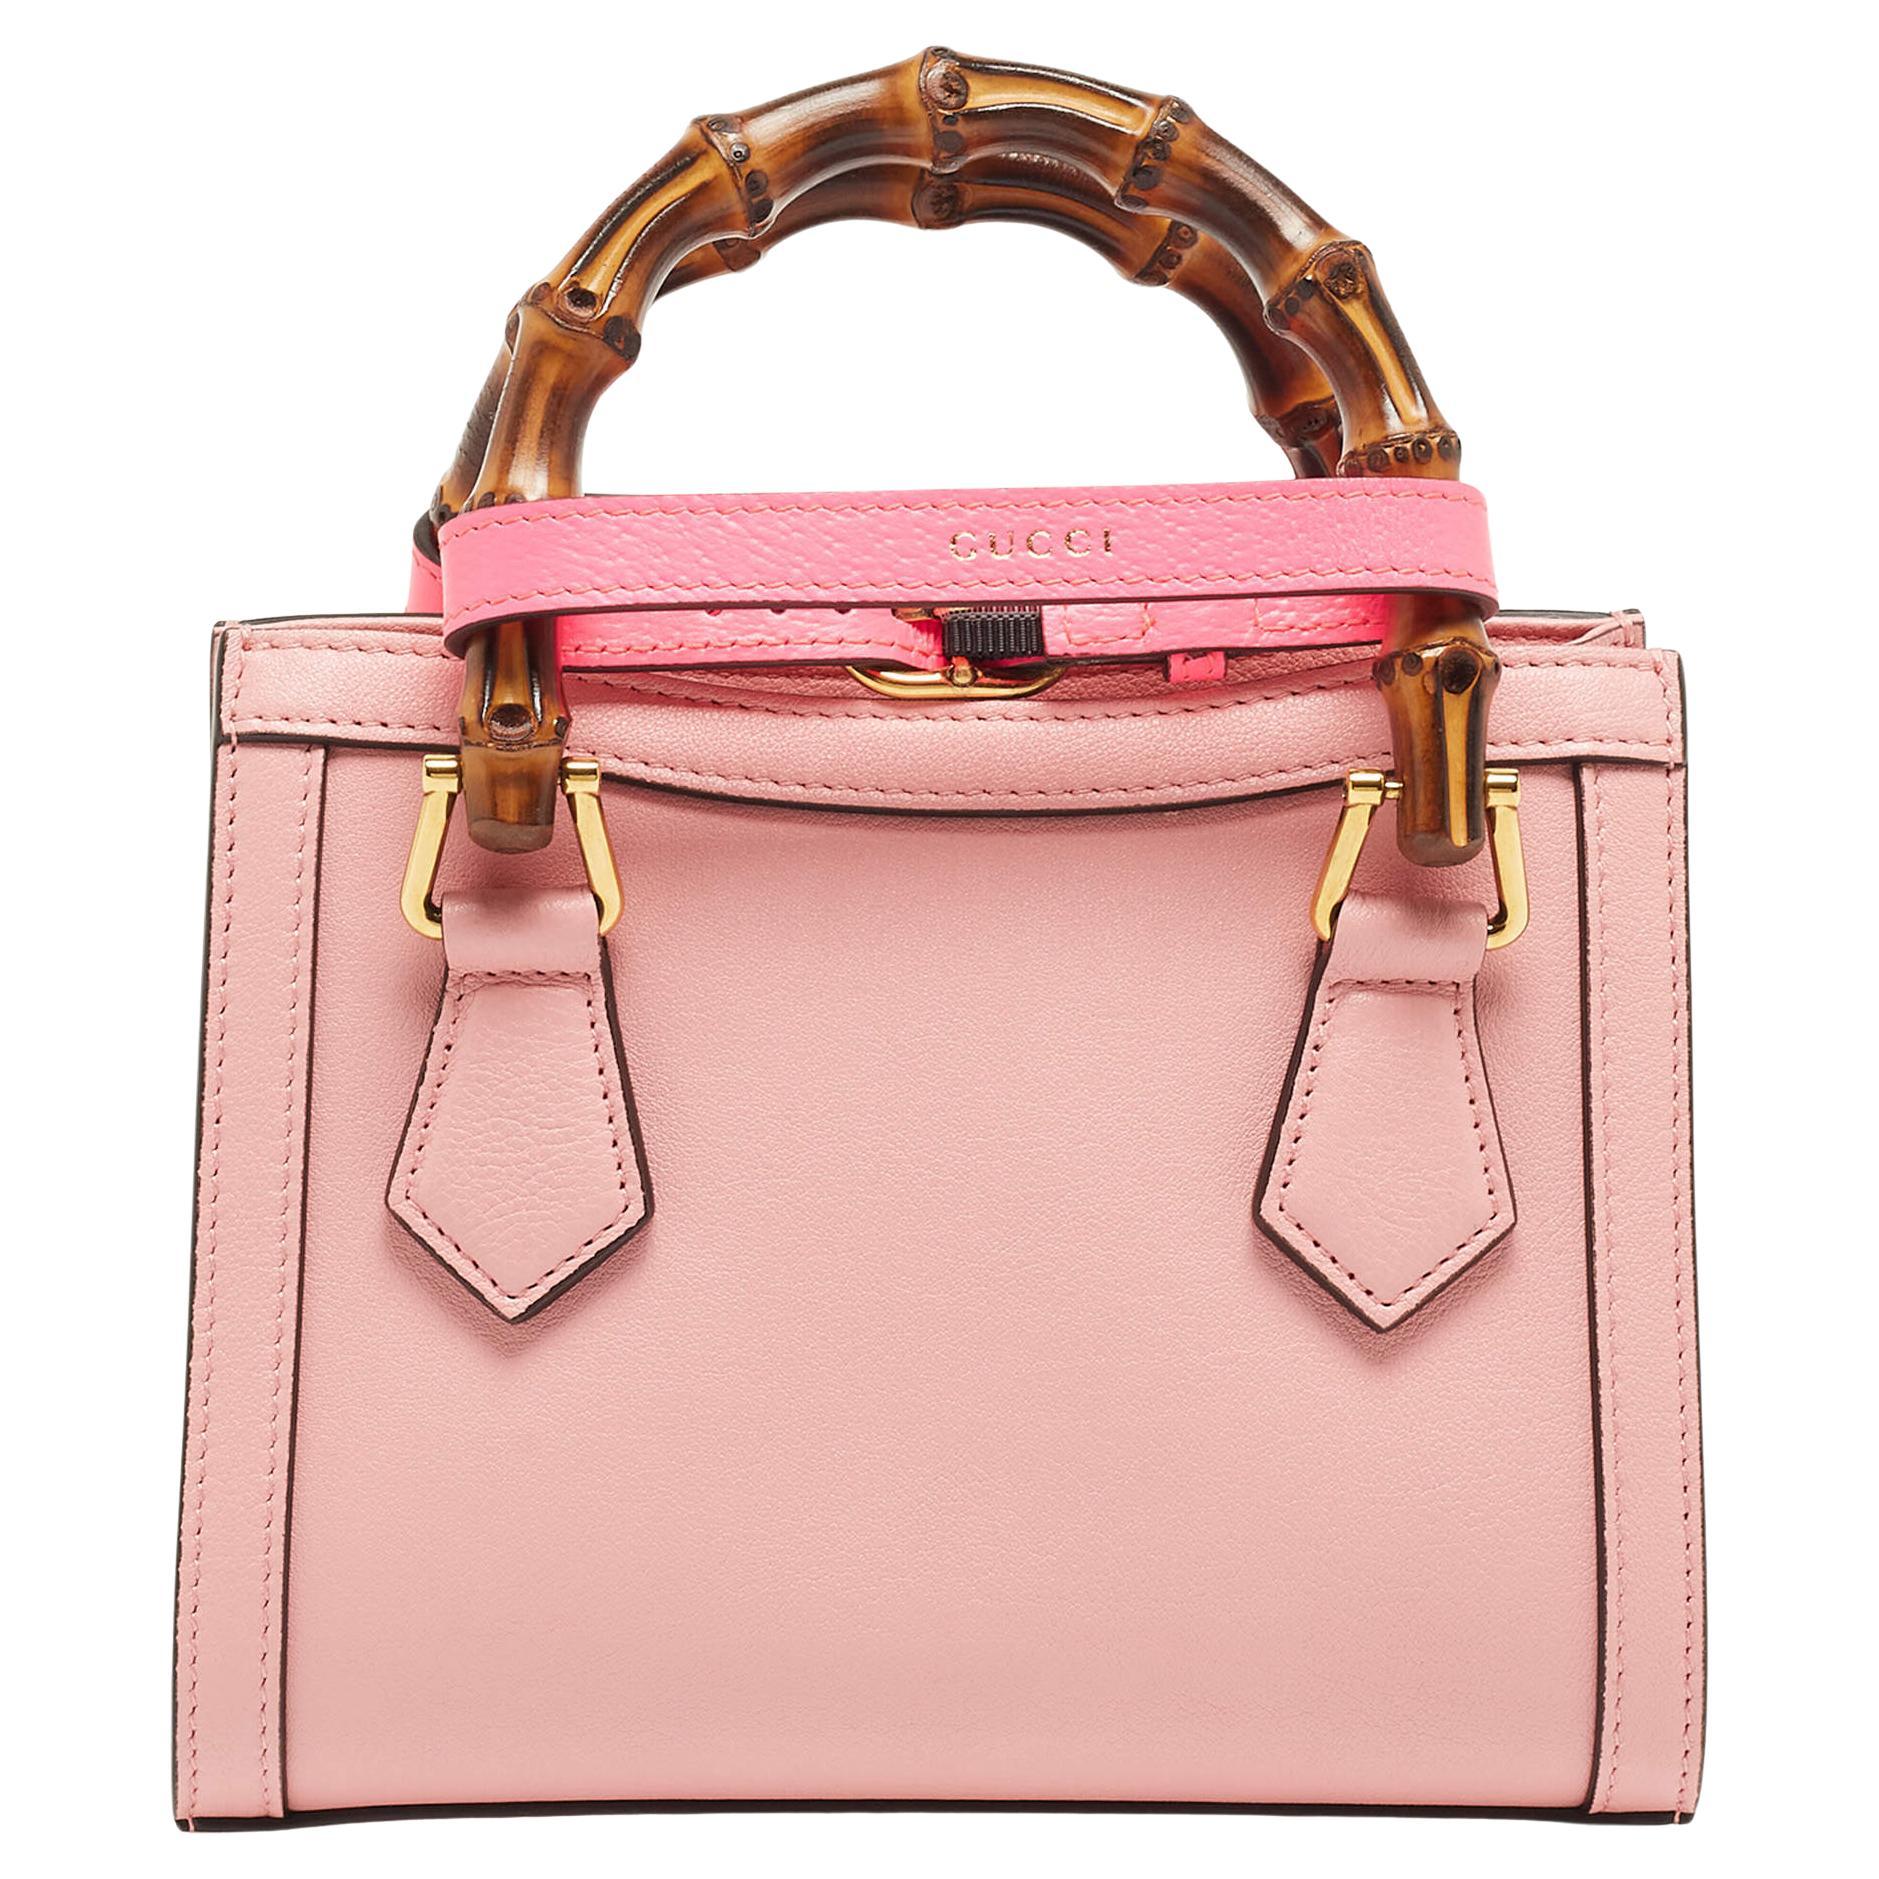 The Gucci Diana tote is a petite, luxurious handbag designed with exquisite pink leather. It features a structured silhouette, iconic double G hardware, bamboo top handles, and a detachable crossbody strap for versatility. This elegant accessory